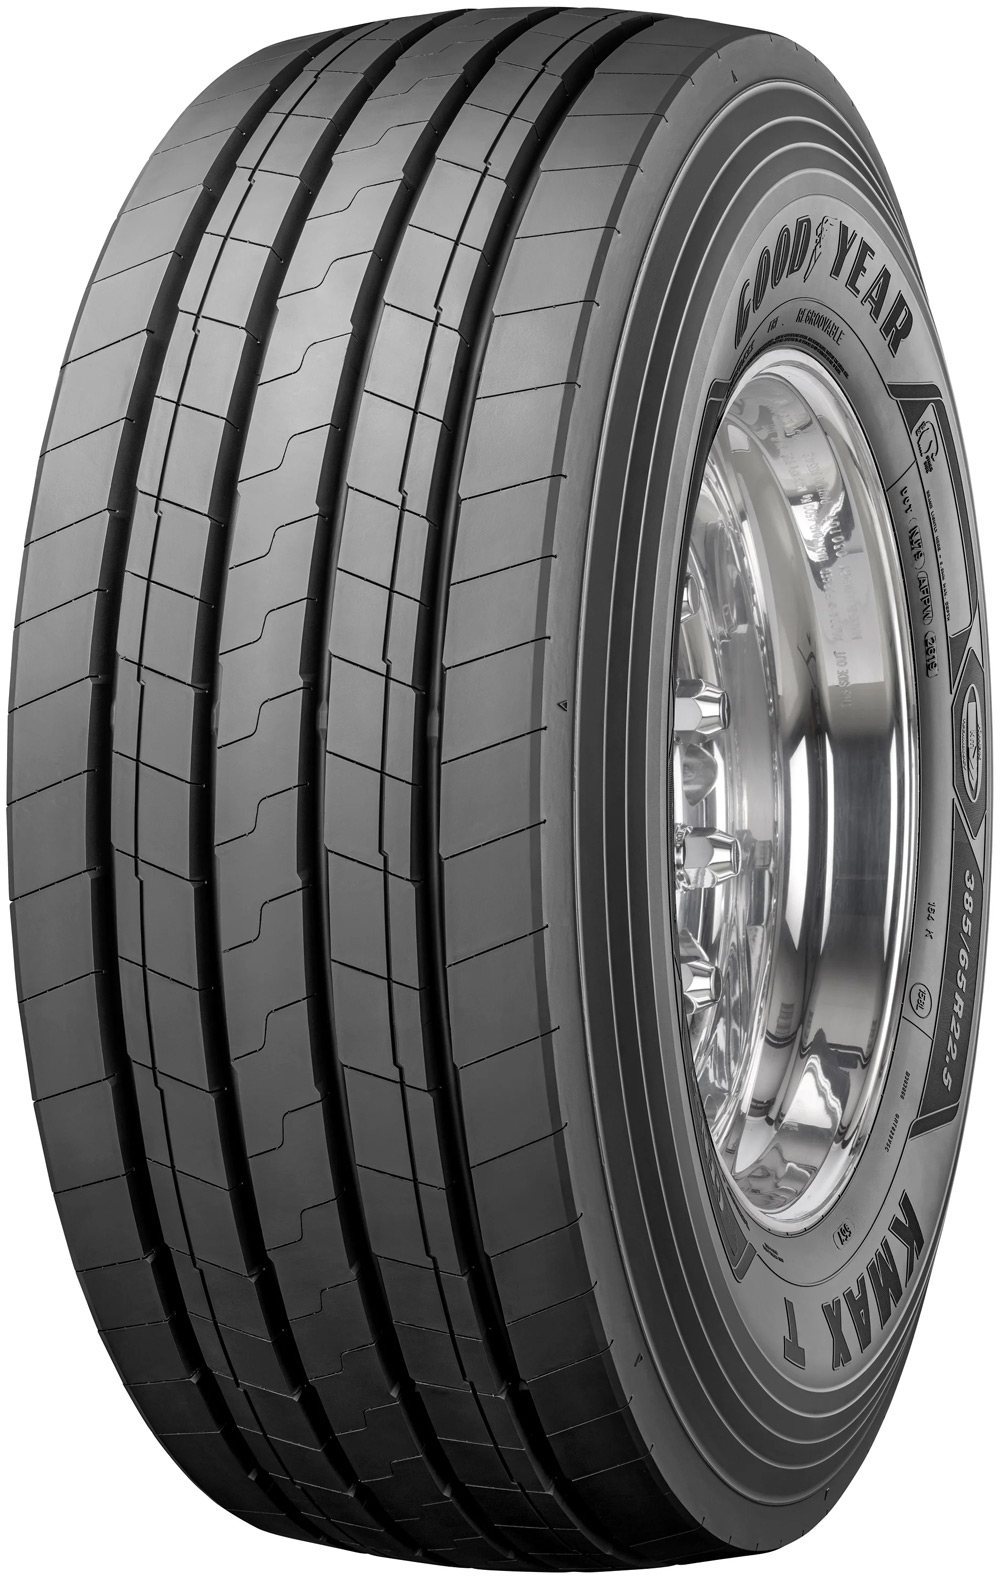 product_type-heavy_tires GOODYEAR KMAX T G2 3PMSF 385/55 R22.5 160K